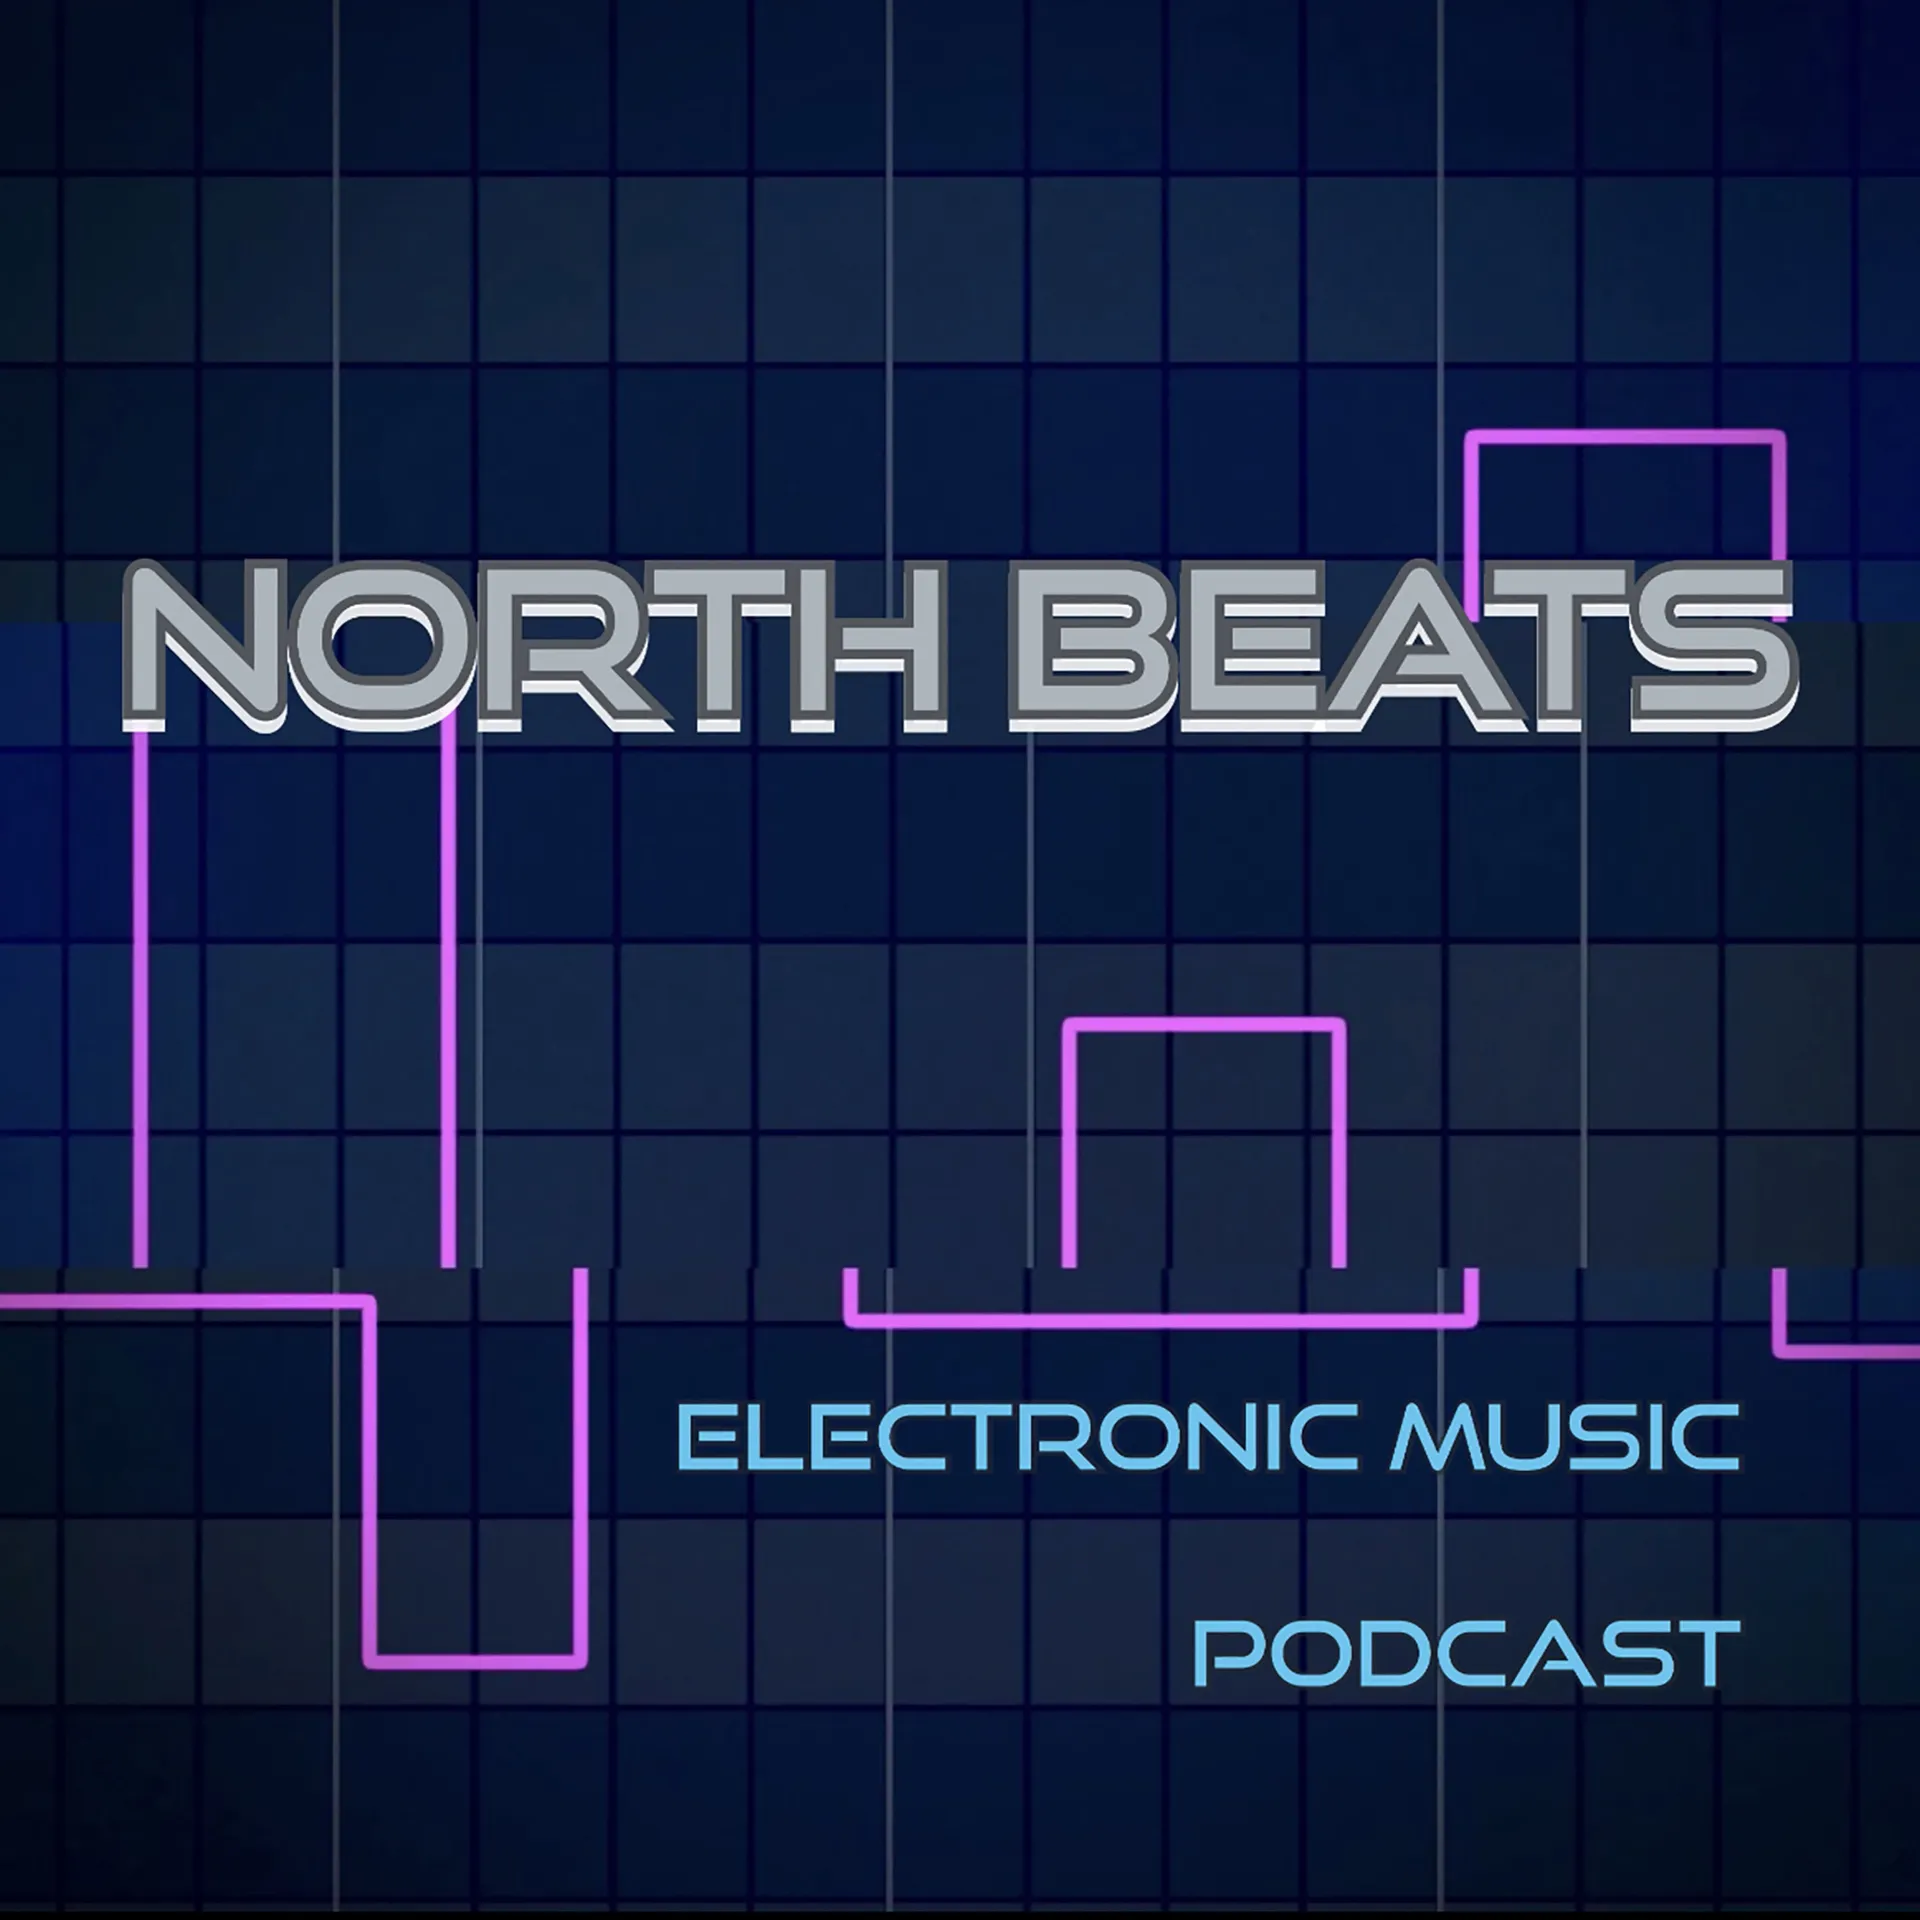 Anti.negative interview on North Beats podcast